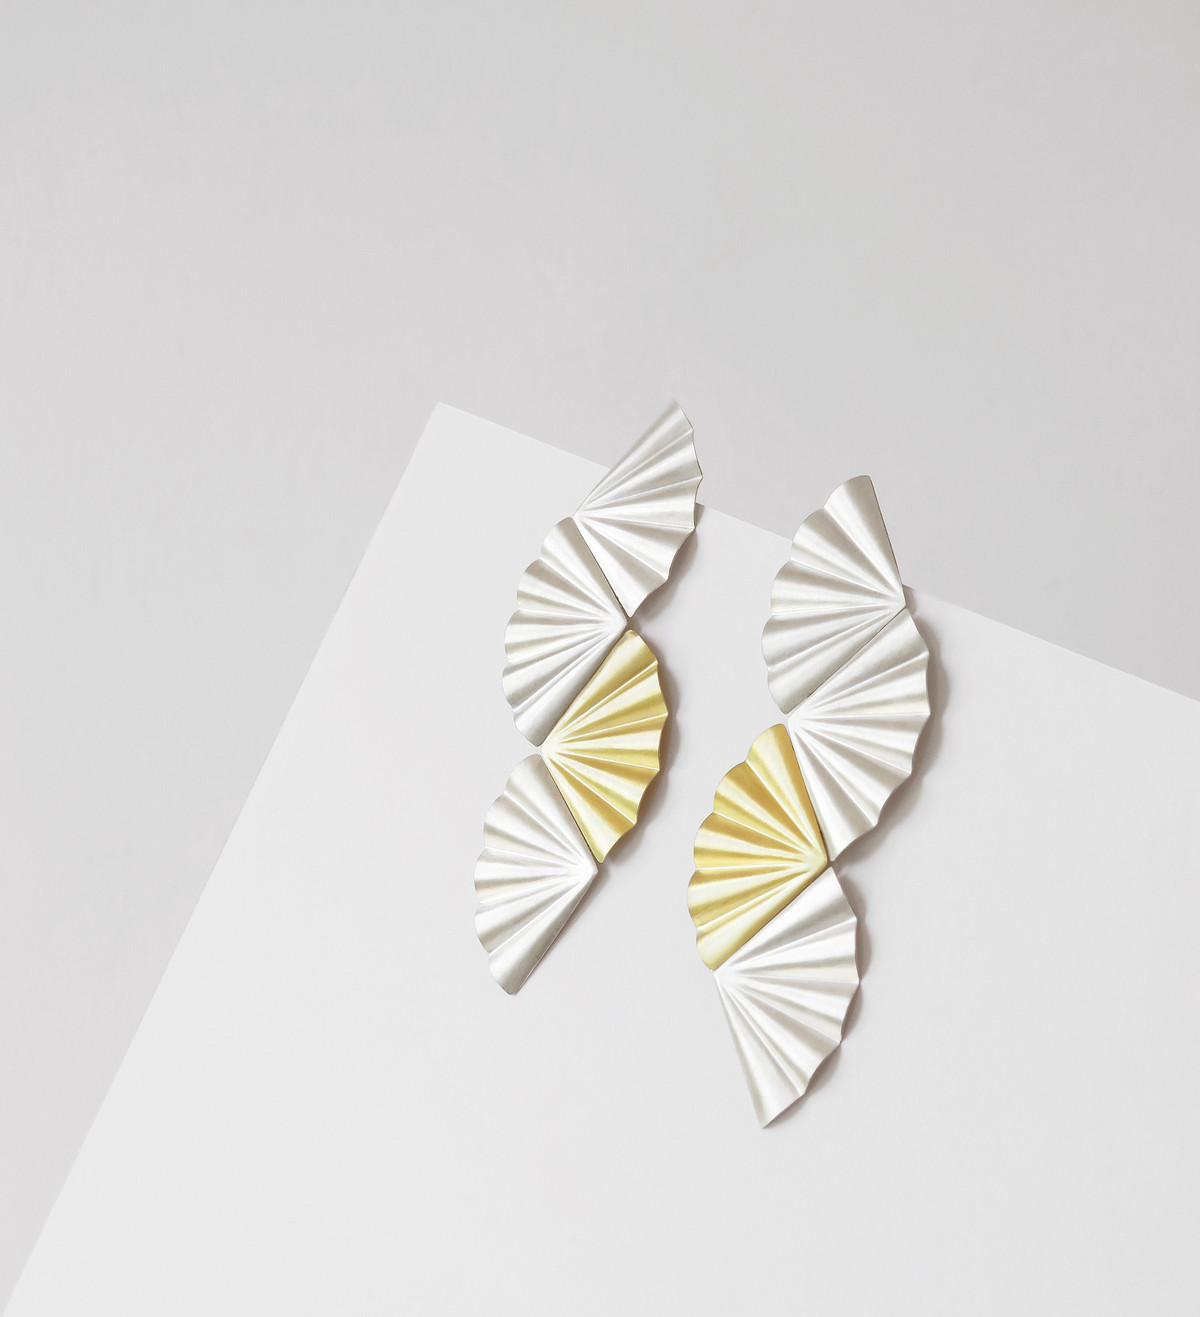 18k gold and silver earrings Maiko 118mm